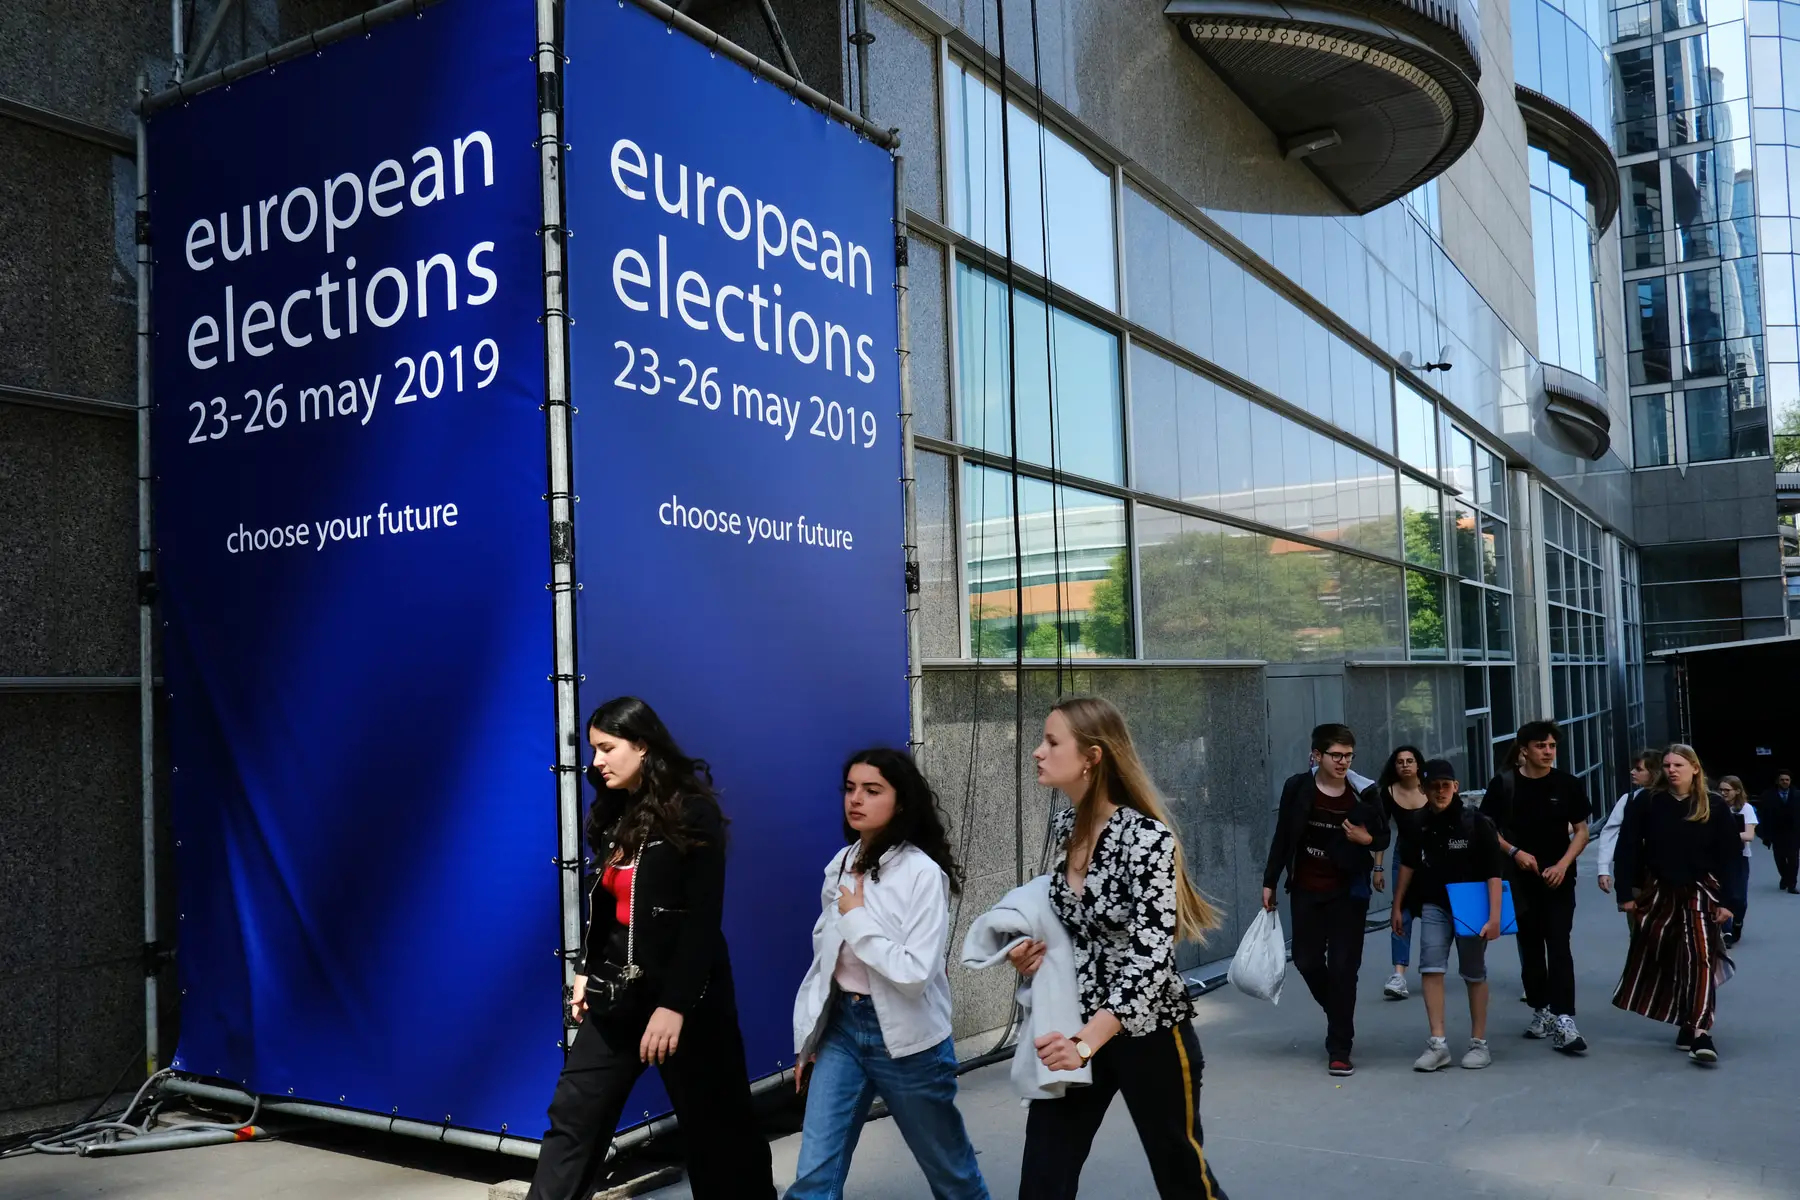 Voters heading to cast their vote on EU election day